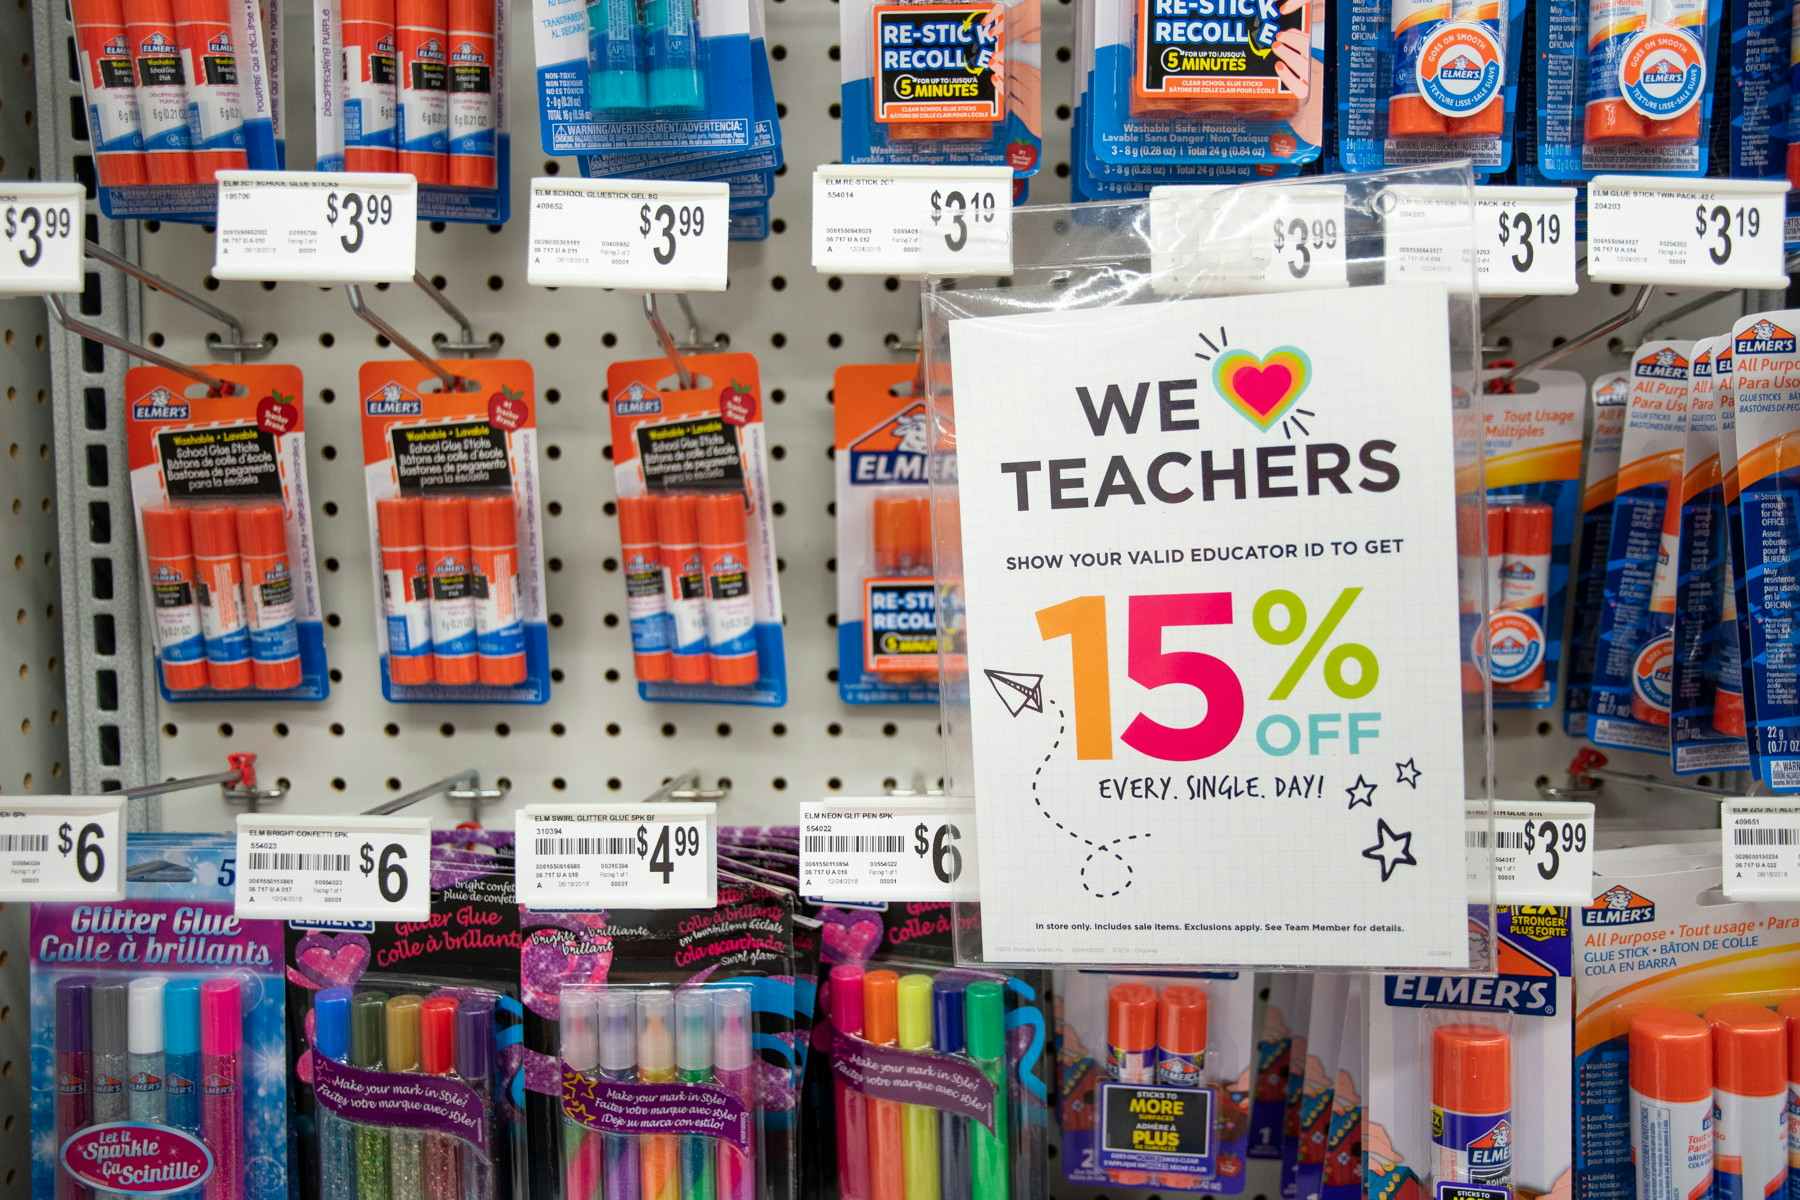 A sign on a wall display at Michaels that says "We love teachers" offering 15% off every day with a valid educator ID.